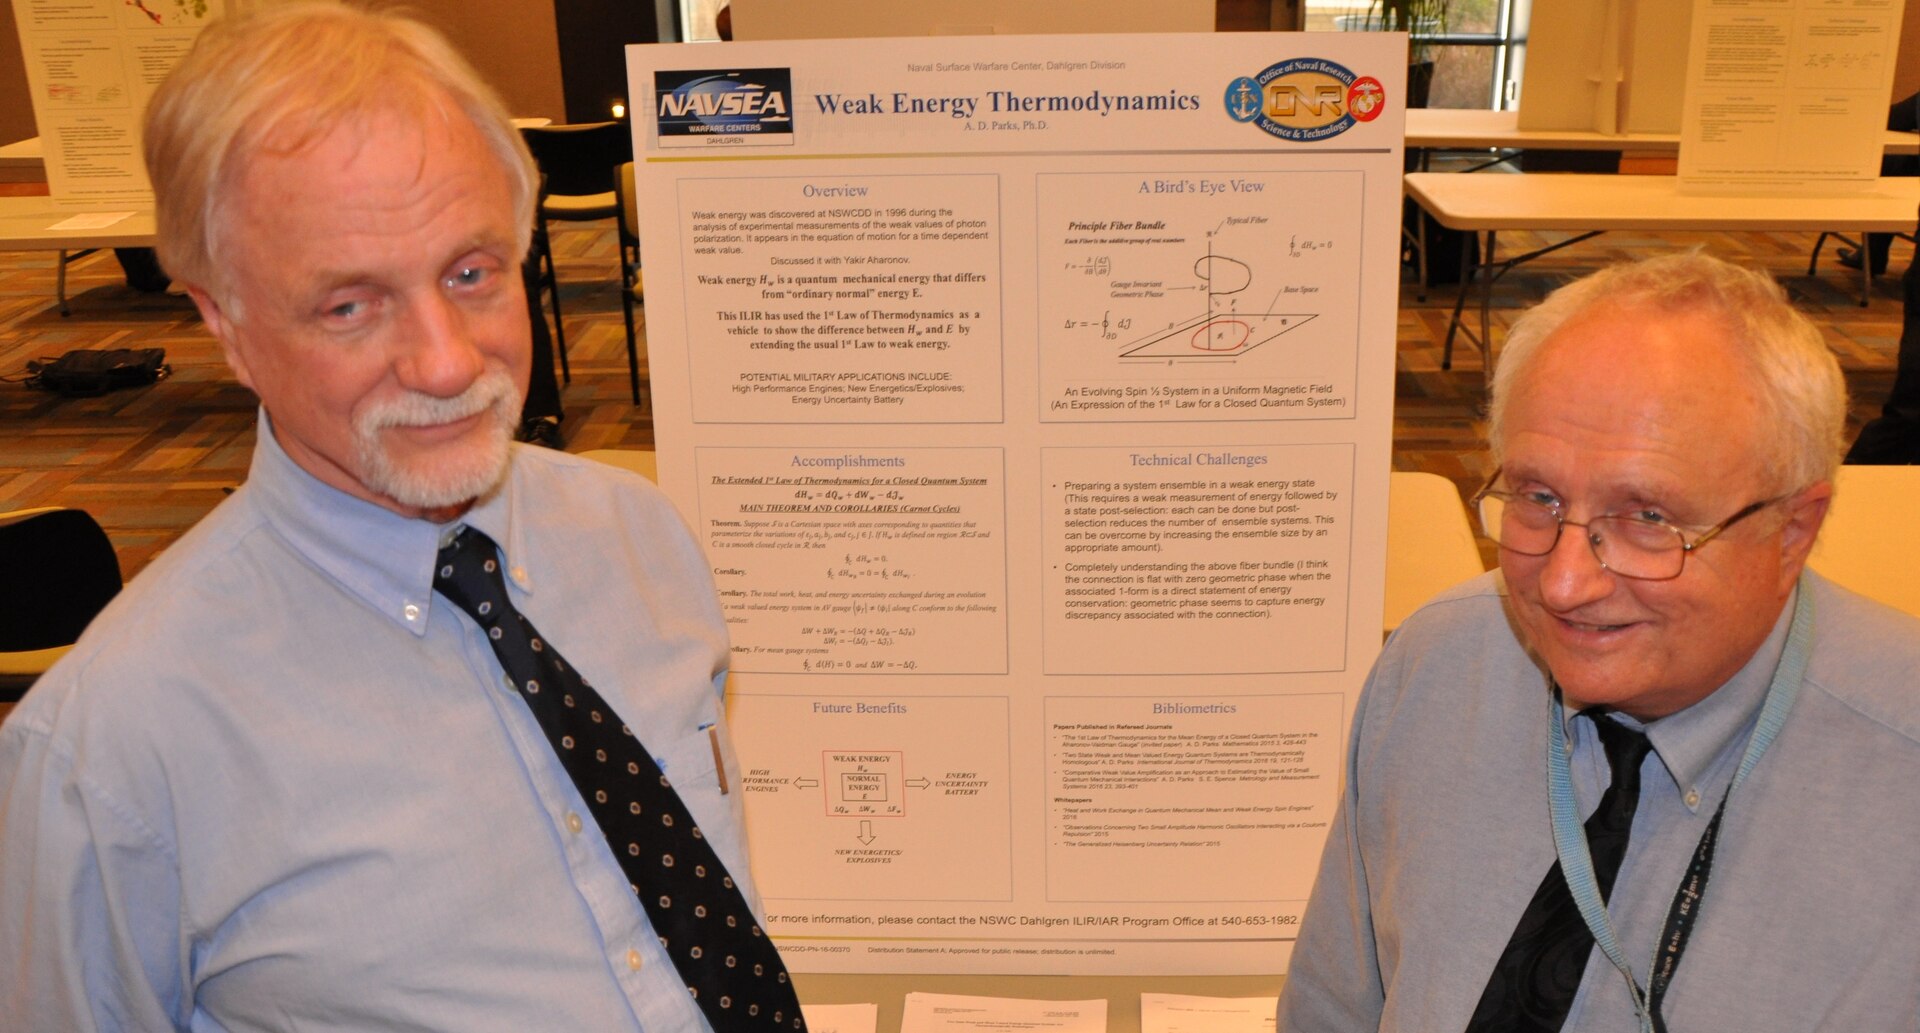 DAHLGREN, Va. – Navy scientists Dr. Dan Parks, left, and Dr. Jeffrey Solka are pictured with a poster explaining weak energy thermodynamics that Parks presented at a November 2016 poster session featuring Naval Surface Warfare Center Dahlgren Division (NSWCDD) In-house Laboratory Independent Research (ILIR) projects. Solka, the NSWCDD ILIR and Independent Applied Research Program Director, presented Parks with the command’s ILIR Excellence Award for his research over the course of ten years on weak energy and its properties at the event. Potential military applications of weak energy includes new energetics and explosives as well as significant impact to high performance engines and the storage of power for warfighters deployed to dangerous and remote regions.  